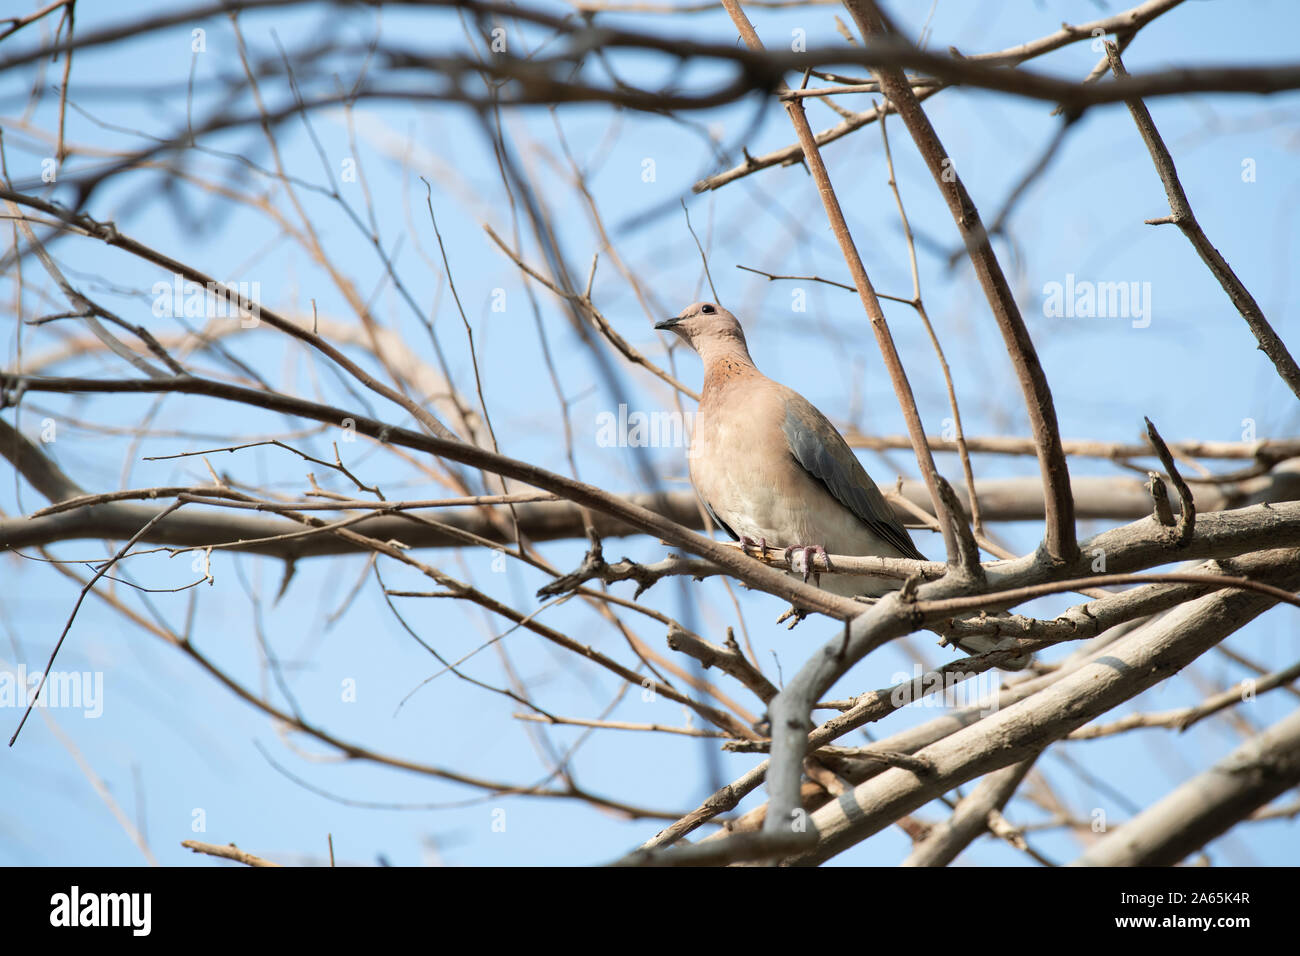 Bird in a tree without leaves Stock Photo